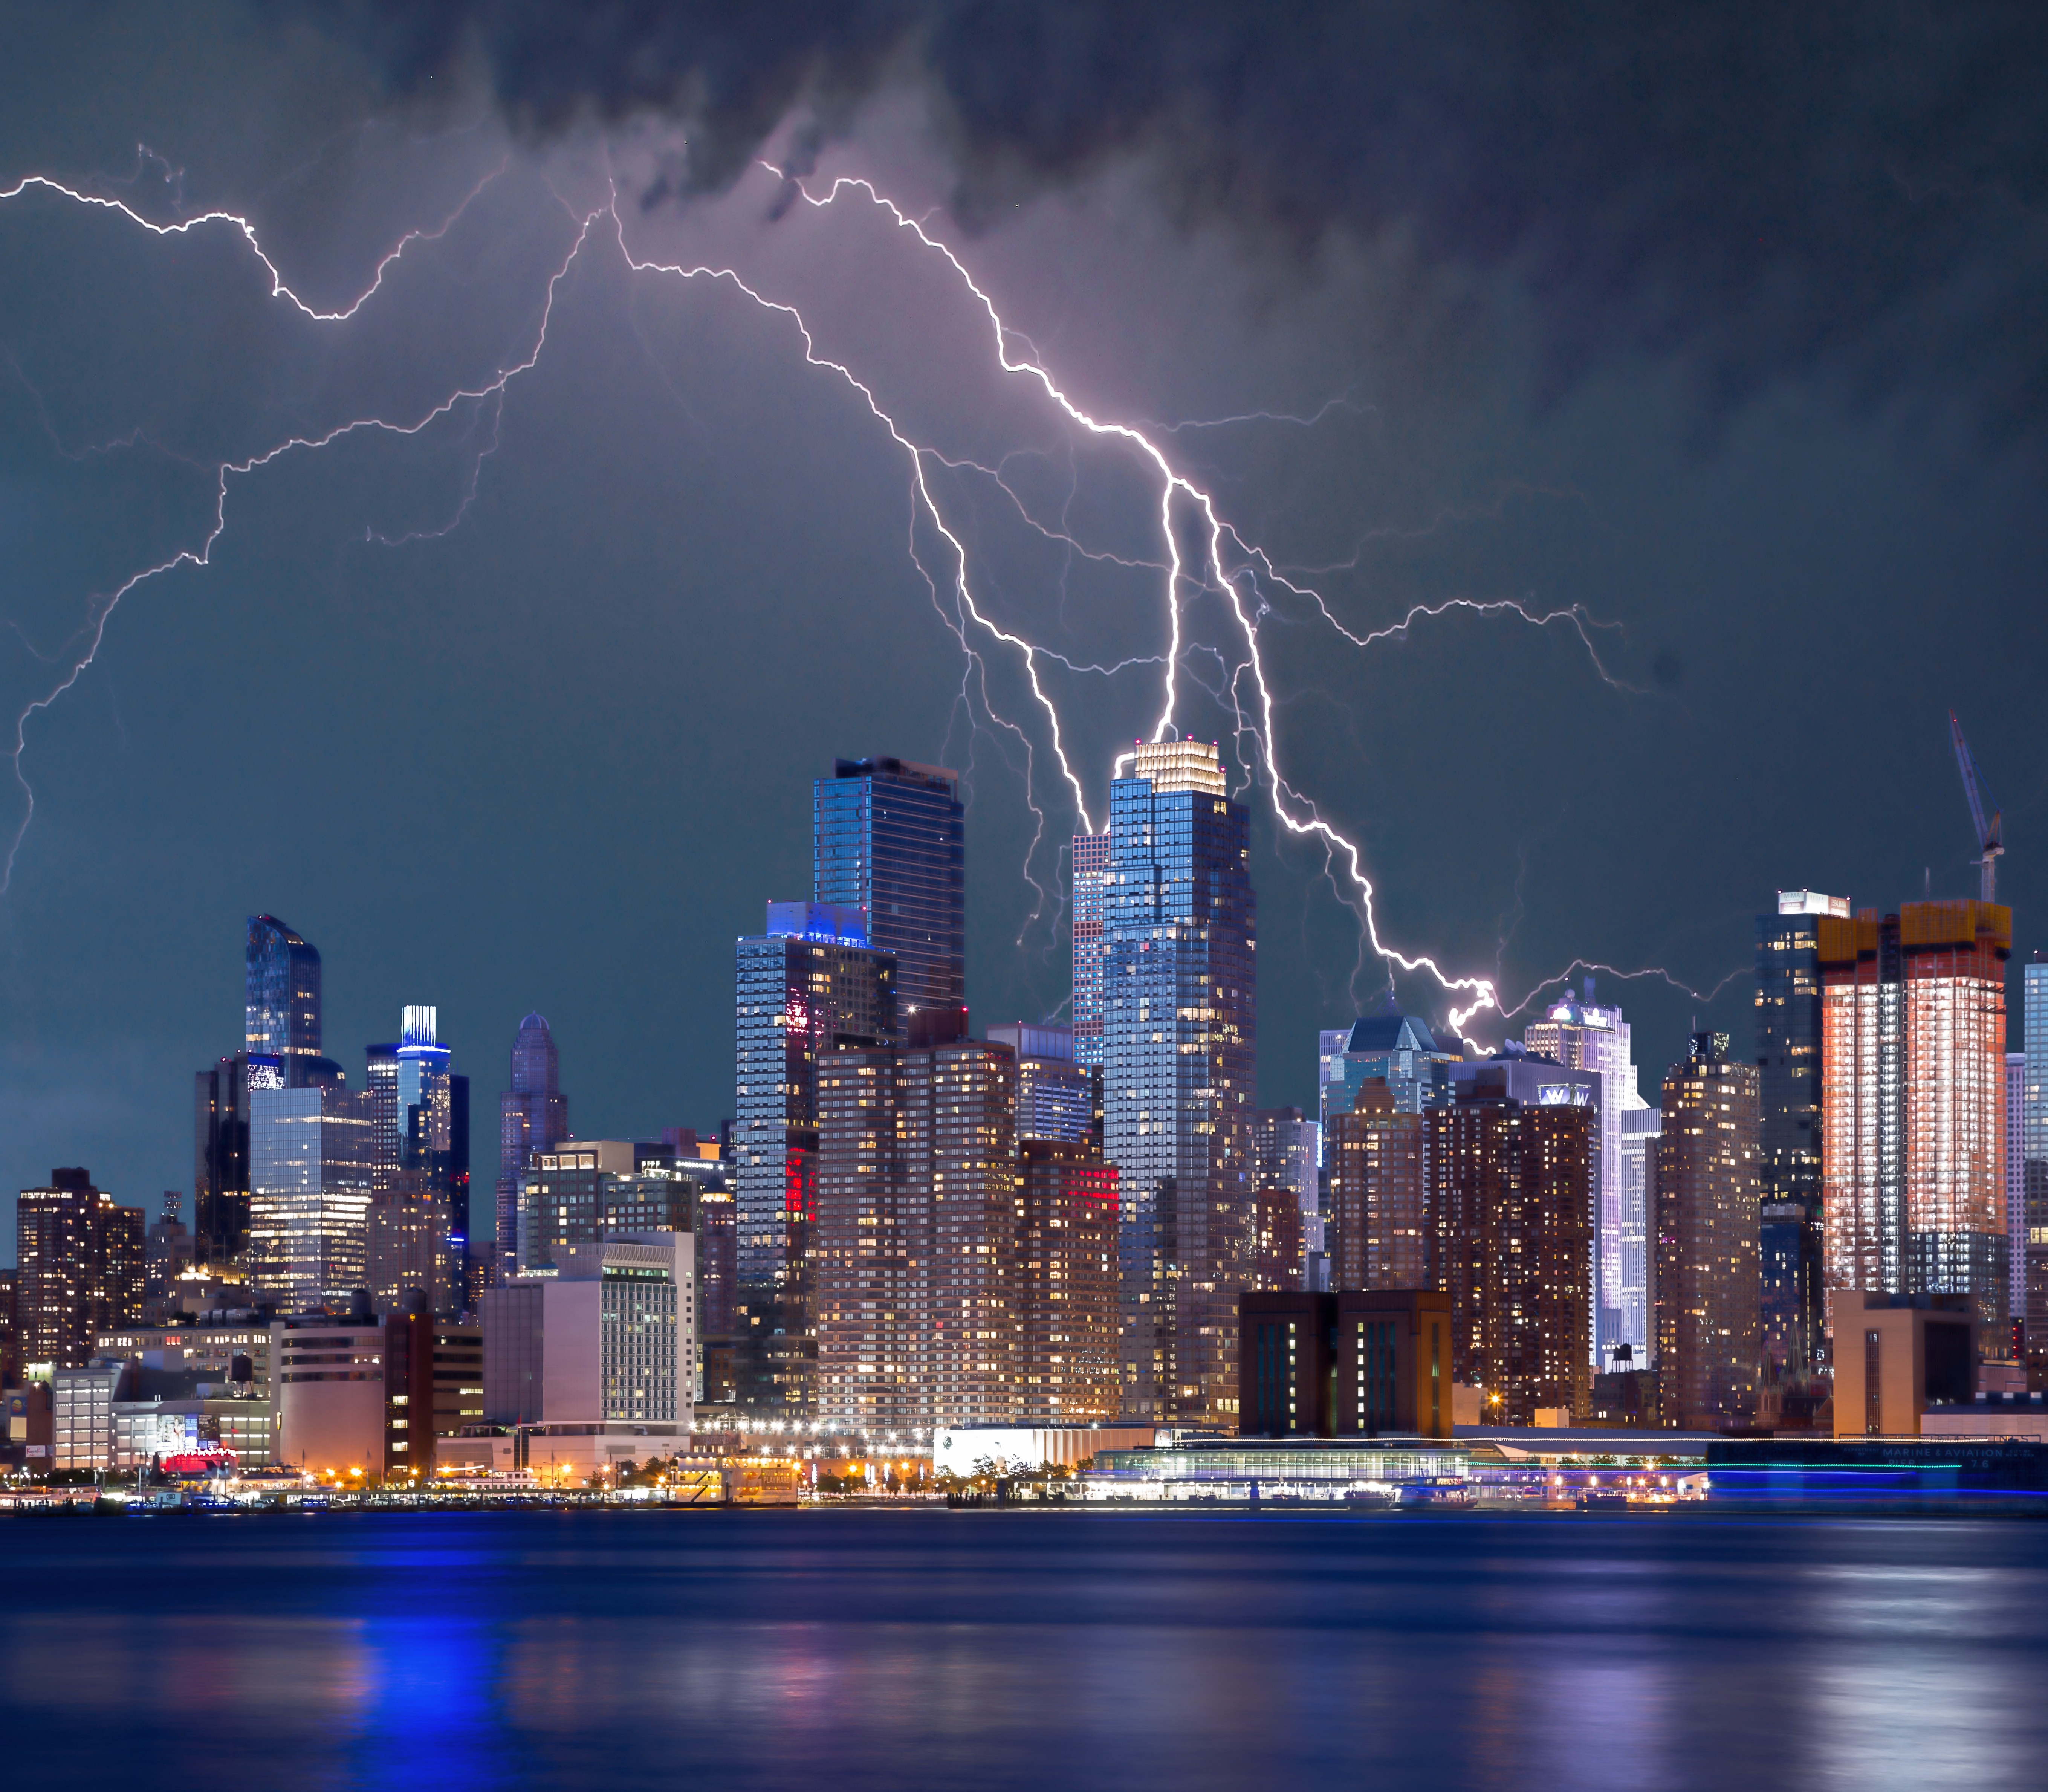 A thunderstorm over New York City